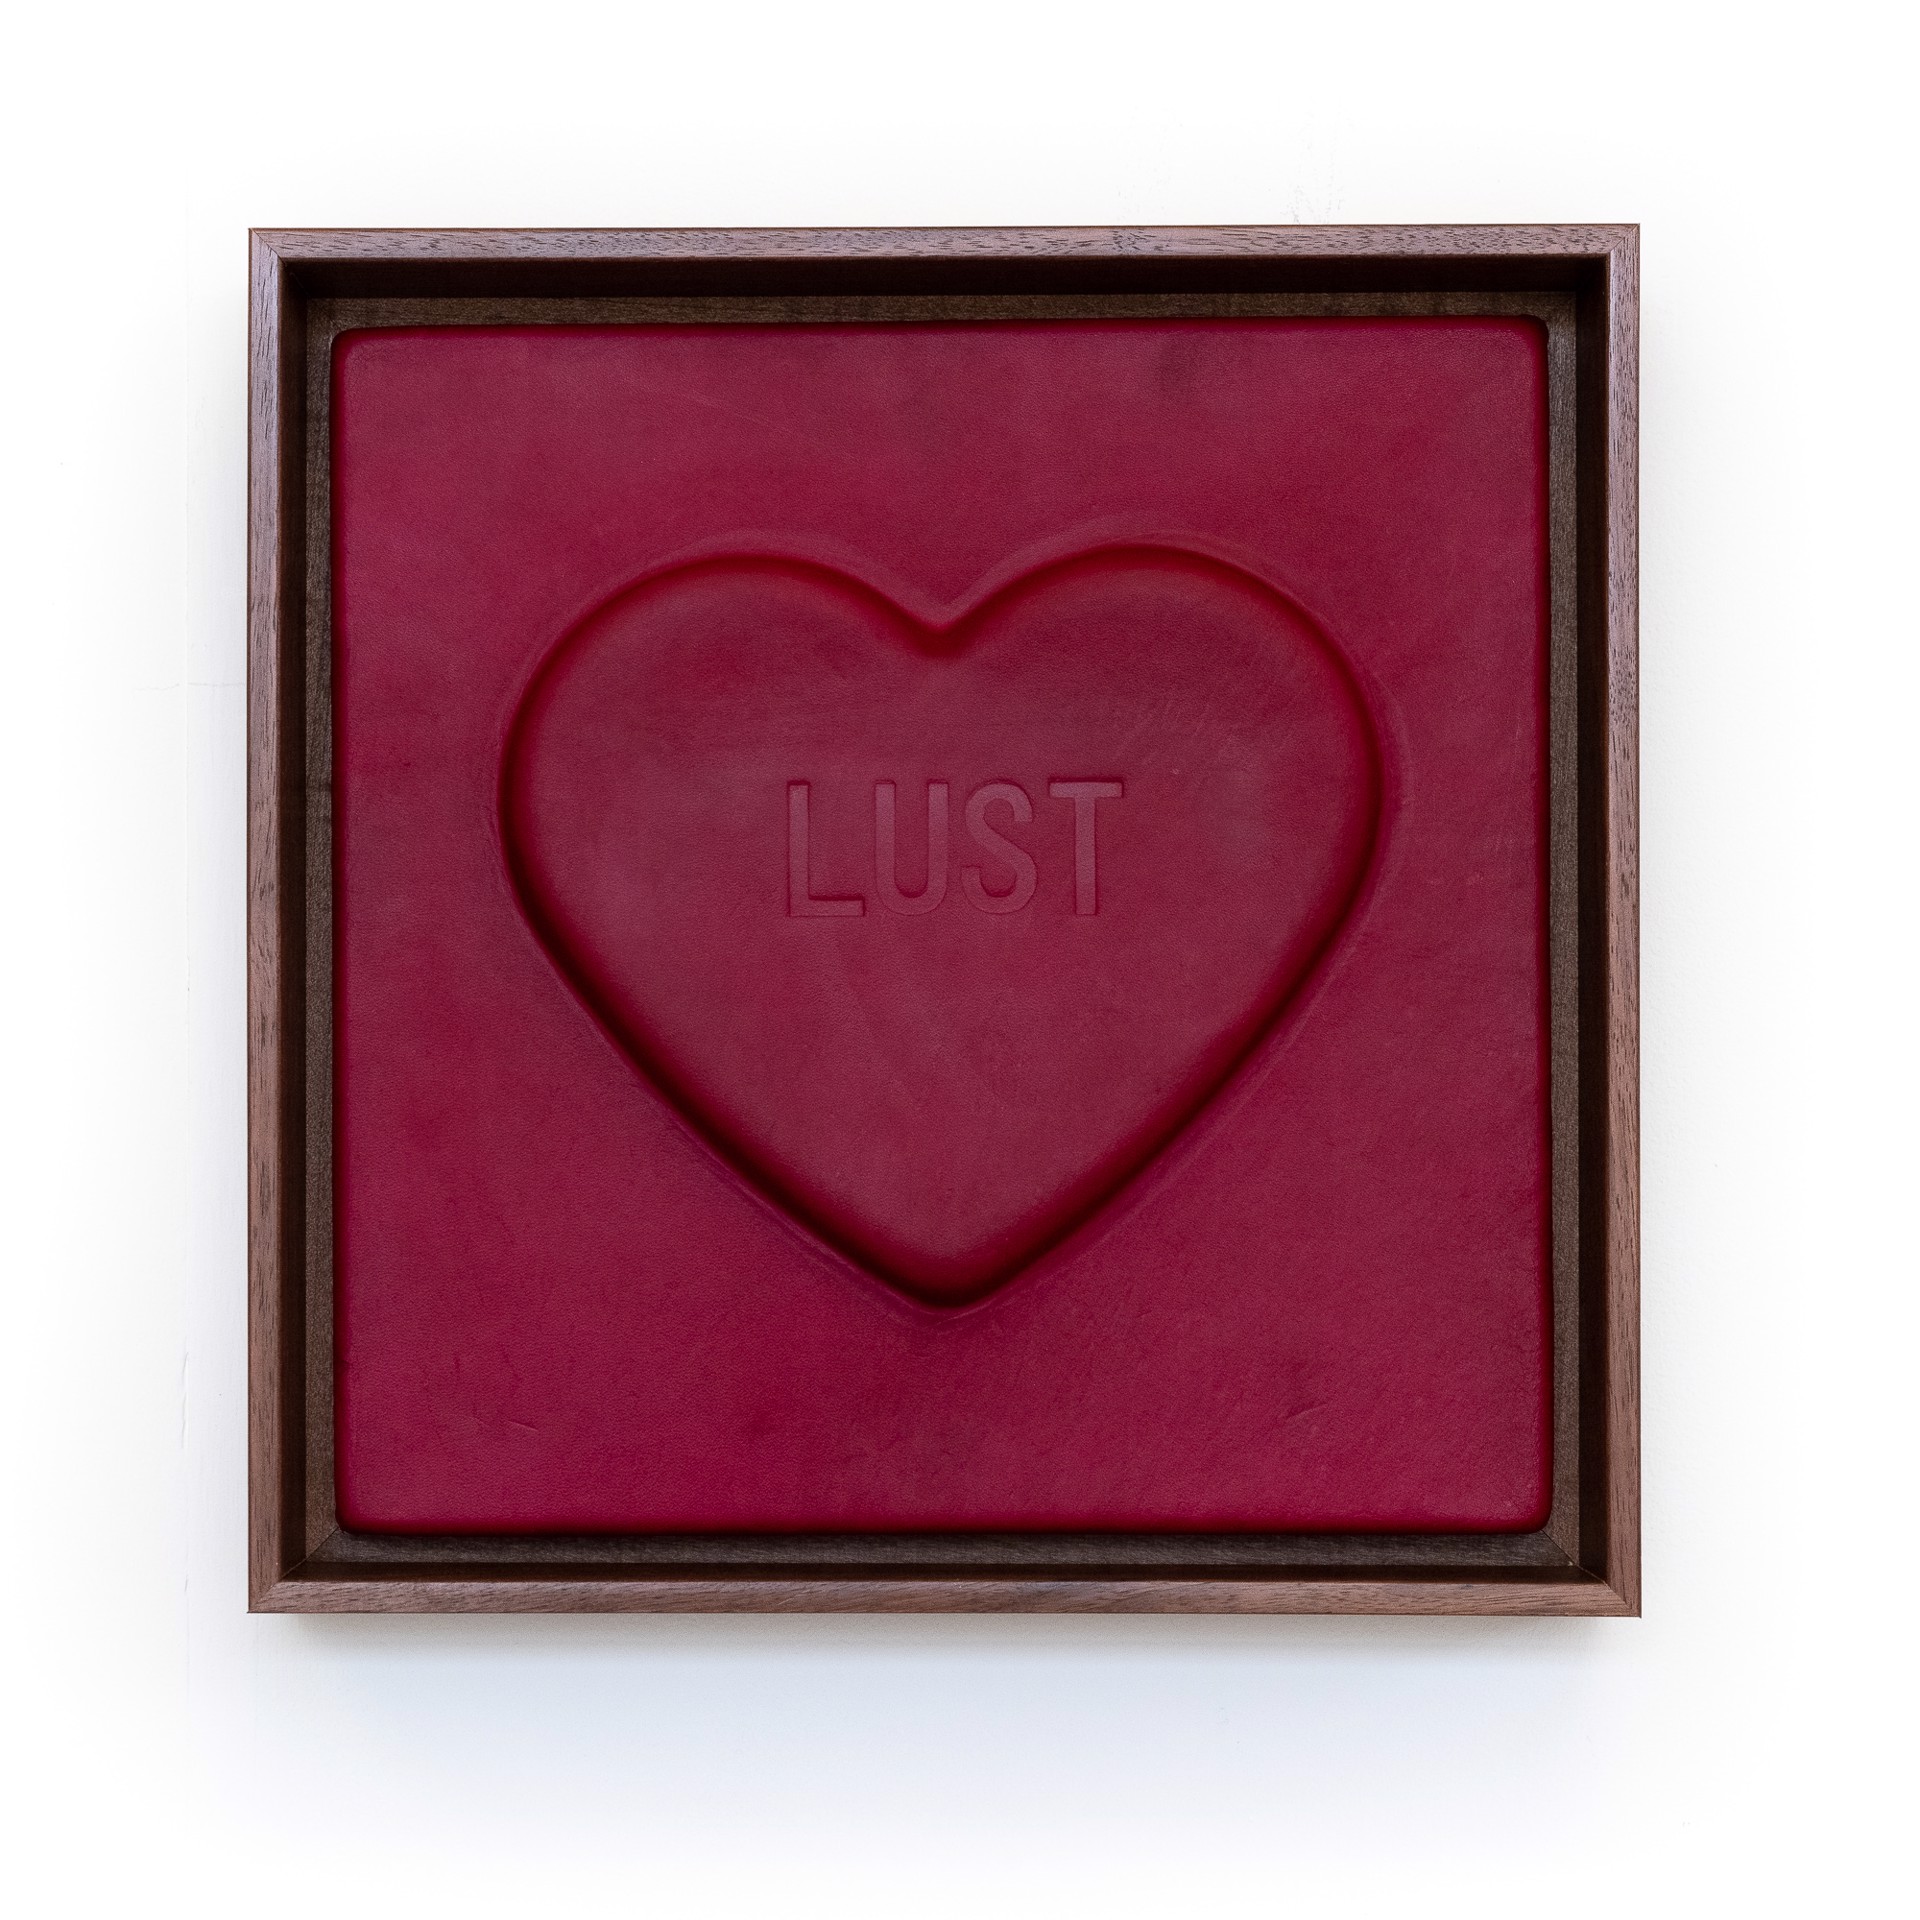 'Lust' - Sweetheart series by Mx. Hyde